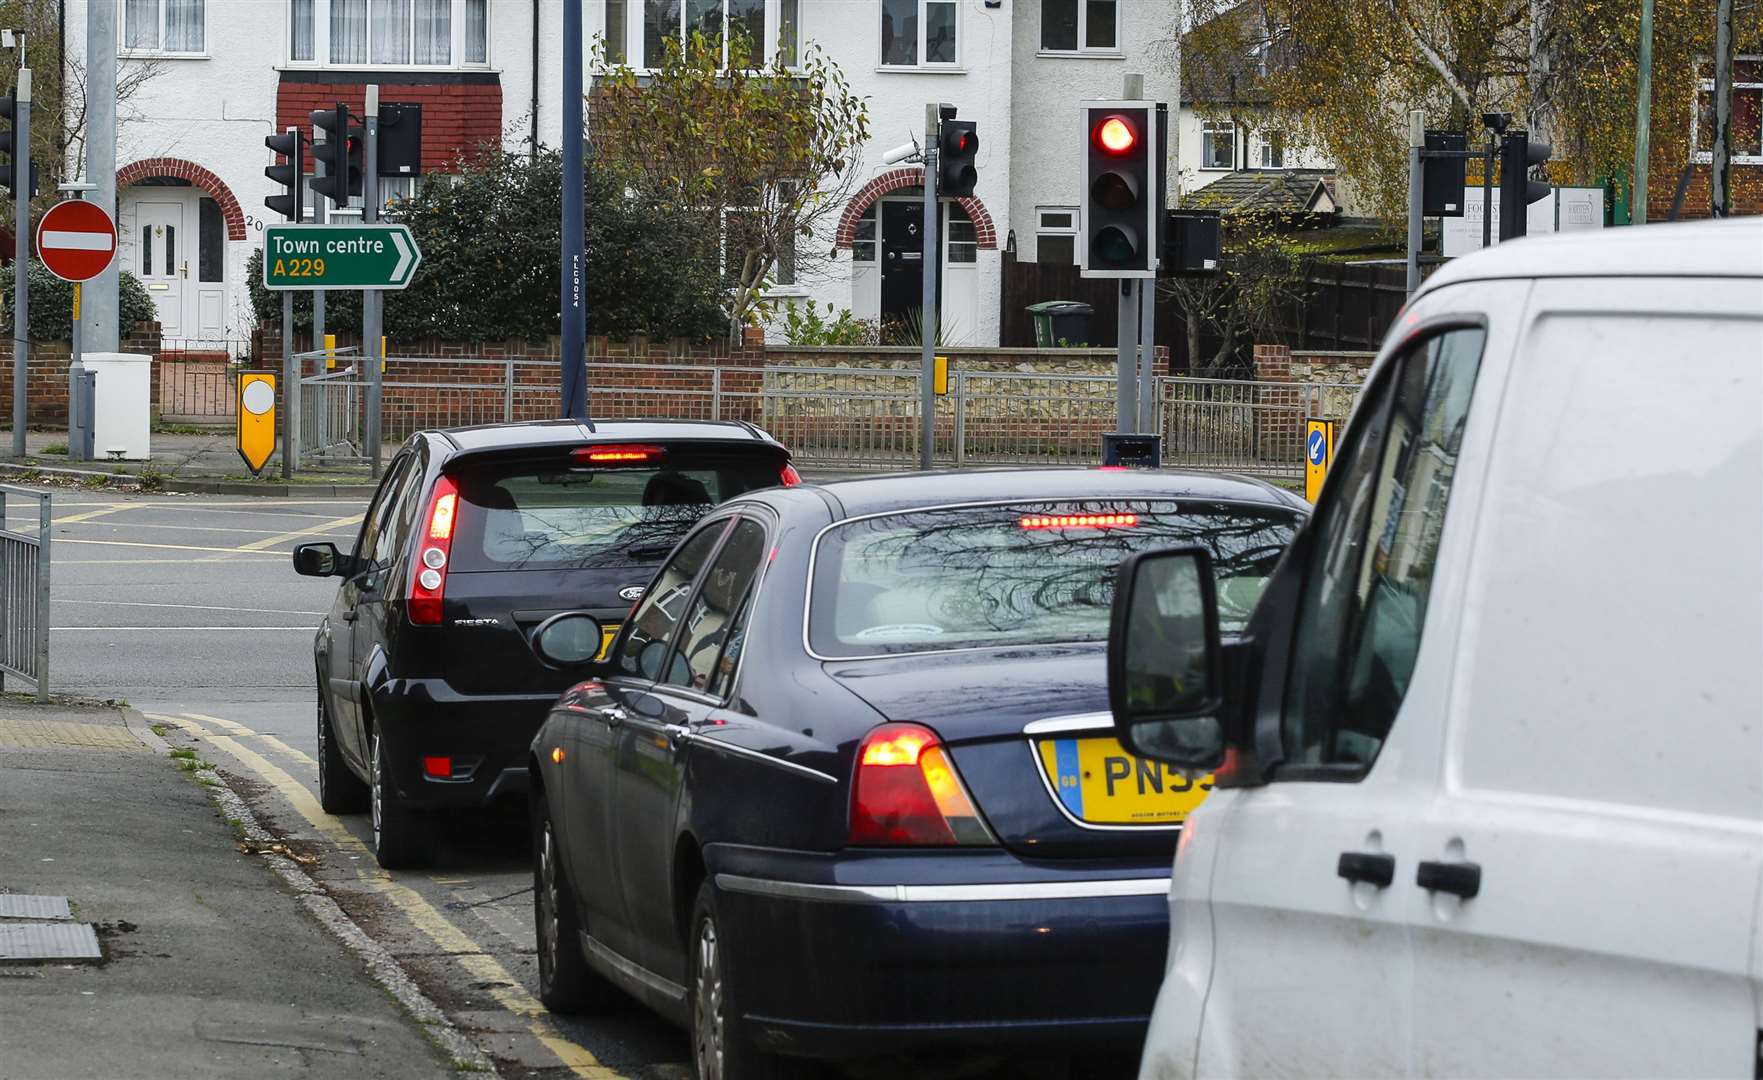 Traffic will no longer be able to exit from Cranborne Avenue